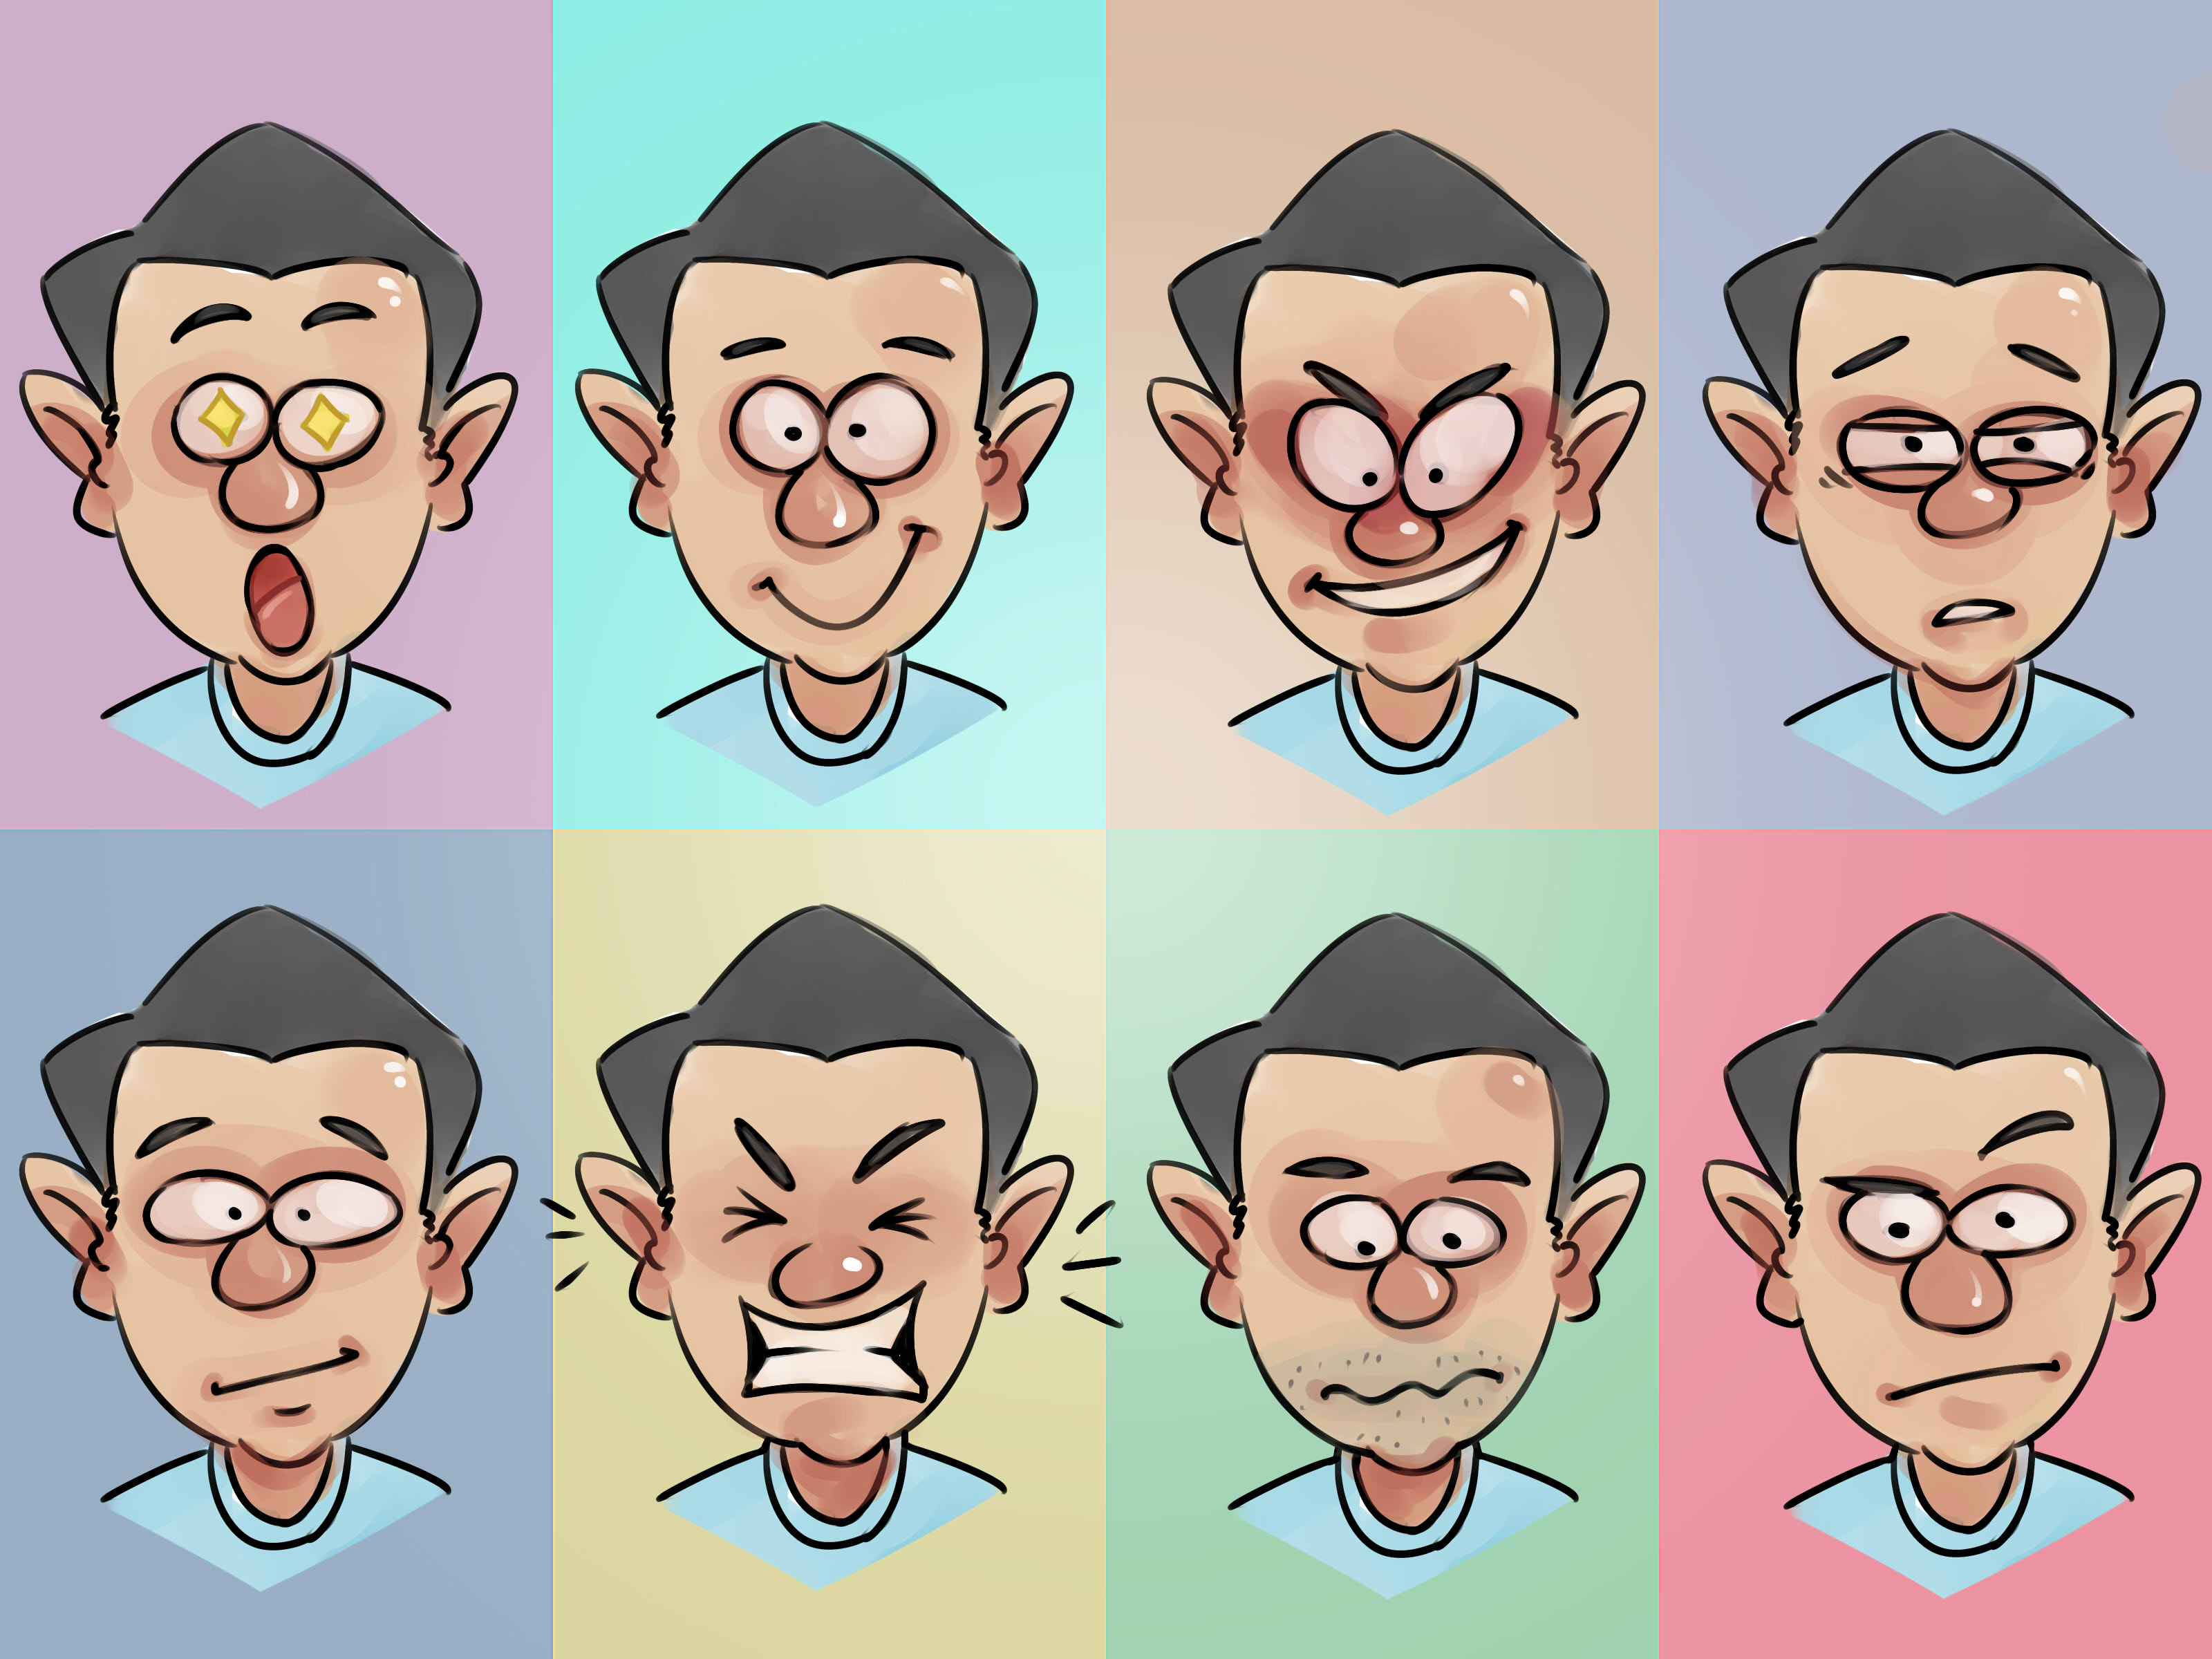 Clip Arts Related To : facial expressions in comics. view all Cartoon Facia...